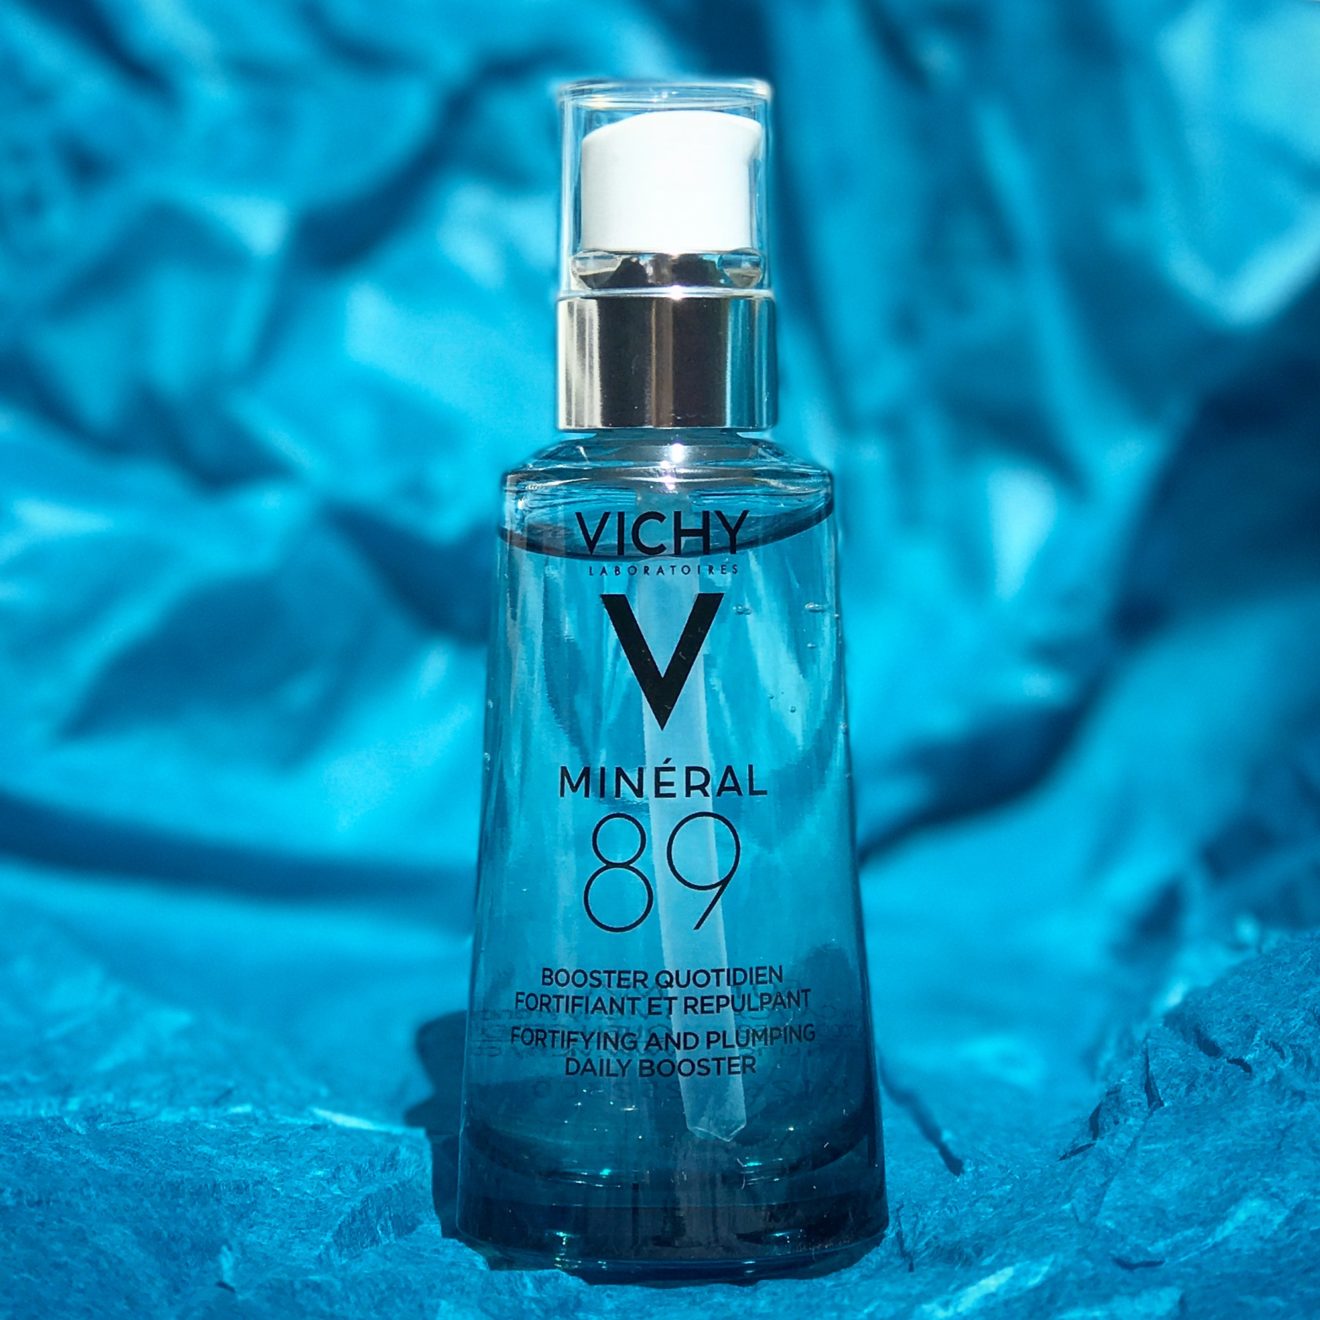 Vichy Mineral 89 Serum: Drench Your Skin In This